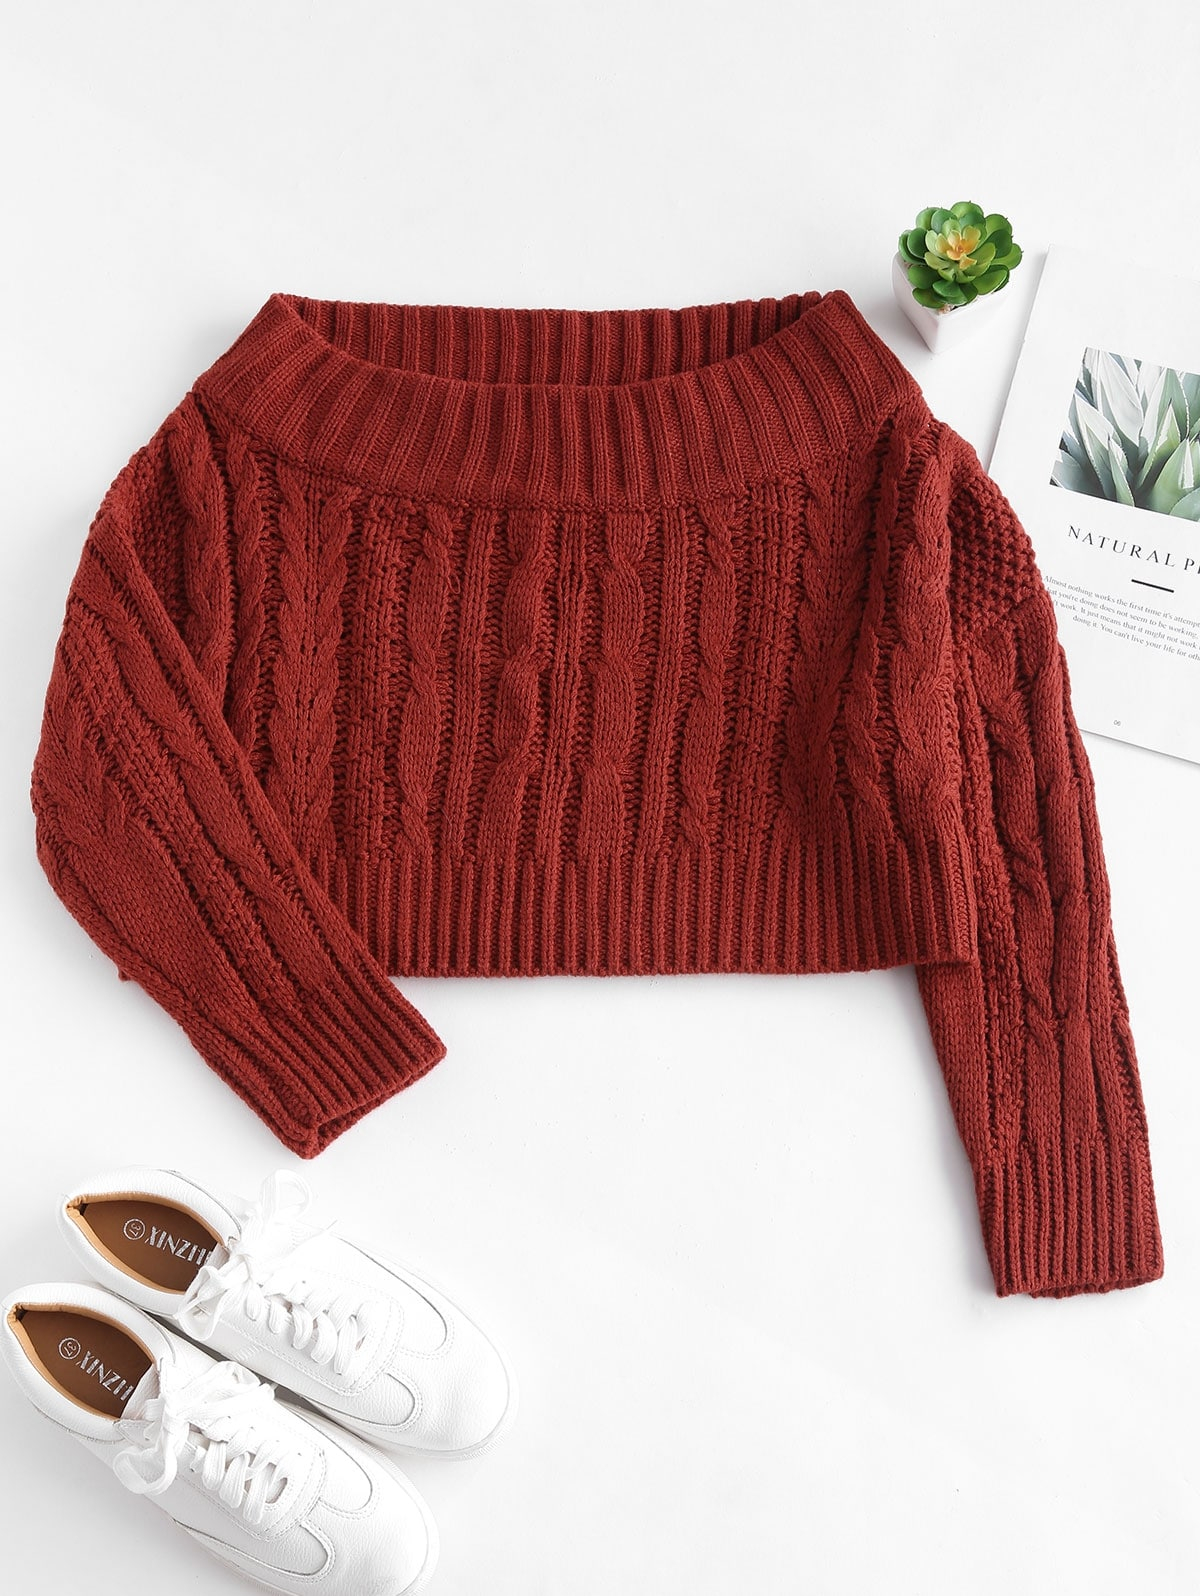 Off The Shoulder Sweater Knitting Pattern Cable Knit Off The Shoulder Sweater